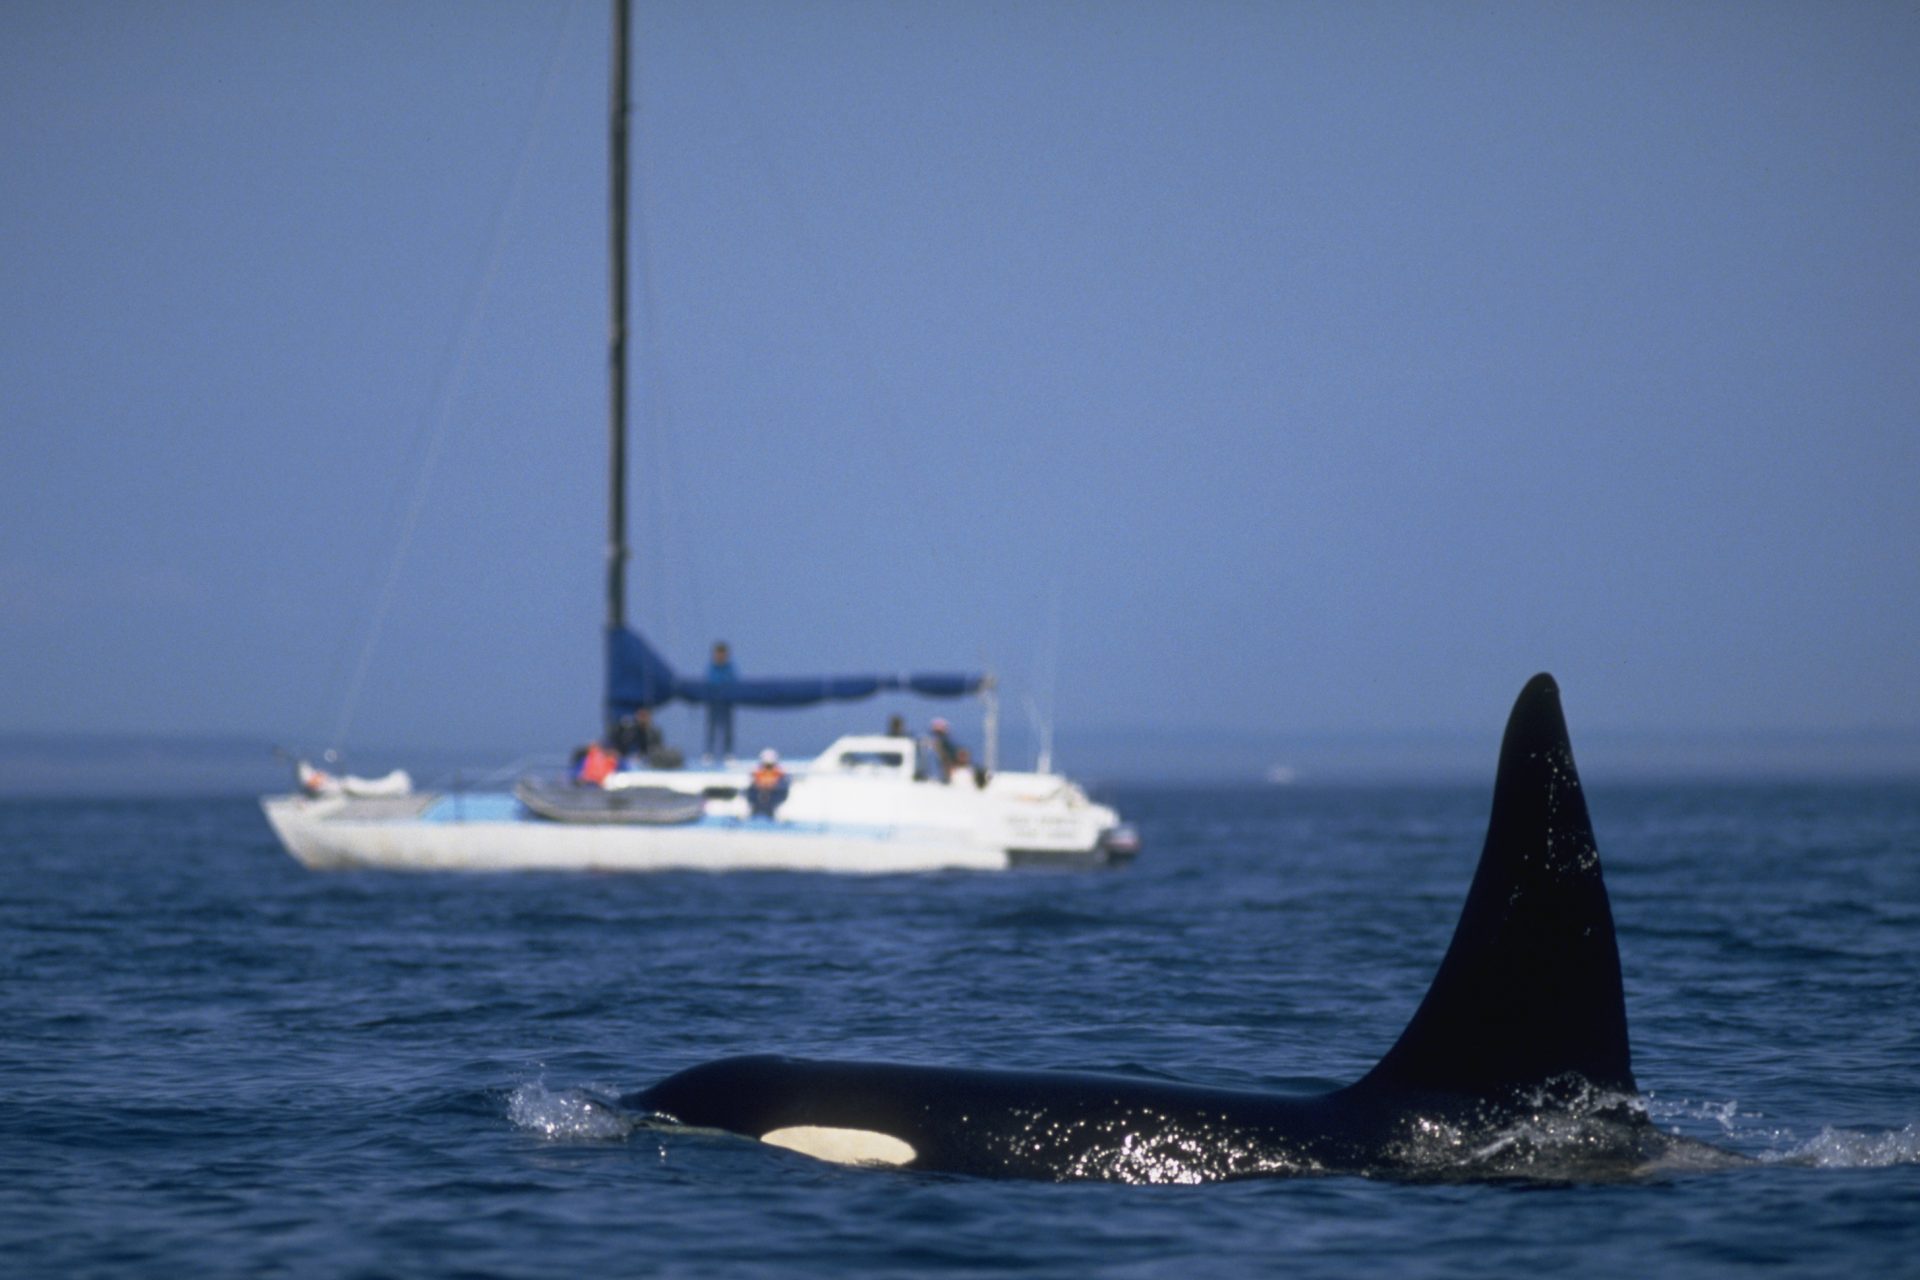 <p>During 2023, we witnessed large pods of orcas ramming and sinking ships off the coast of Gibraltar. They would precisly target ship keels and rudders in order to disable the vessle! Two racing yatchs were attacked by the killer whales during The Ocean Race, but why?</p>